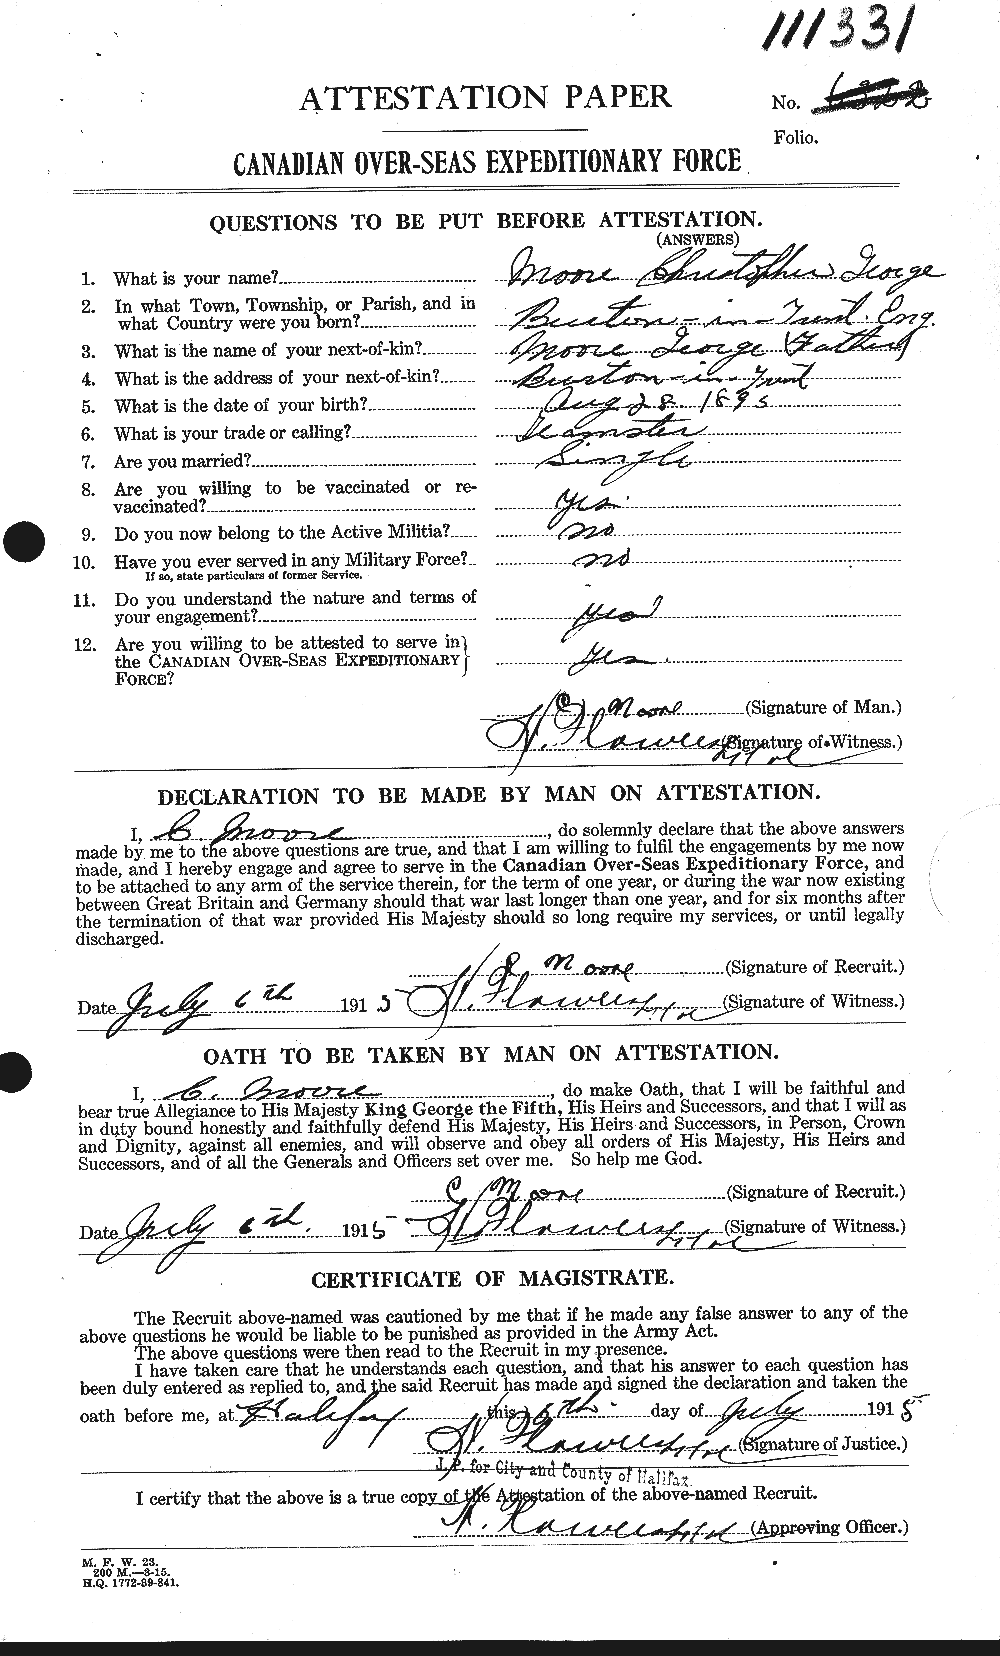 Personnel Records of the First World War - CEF 506528a